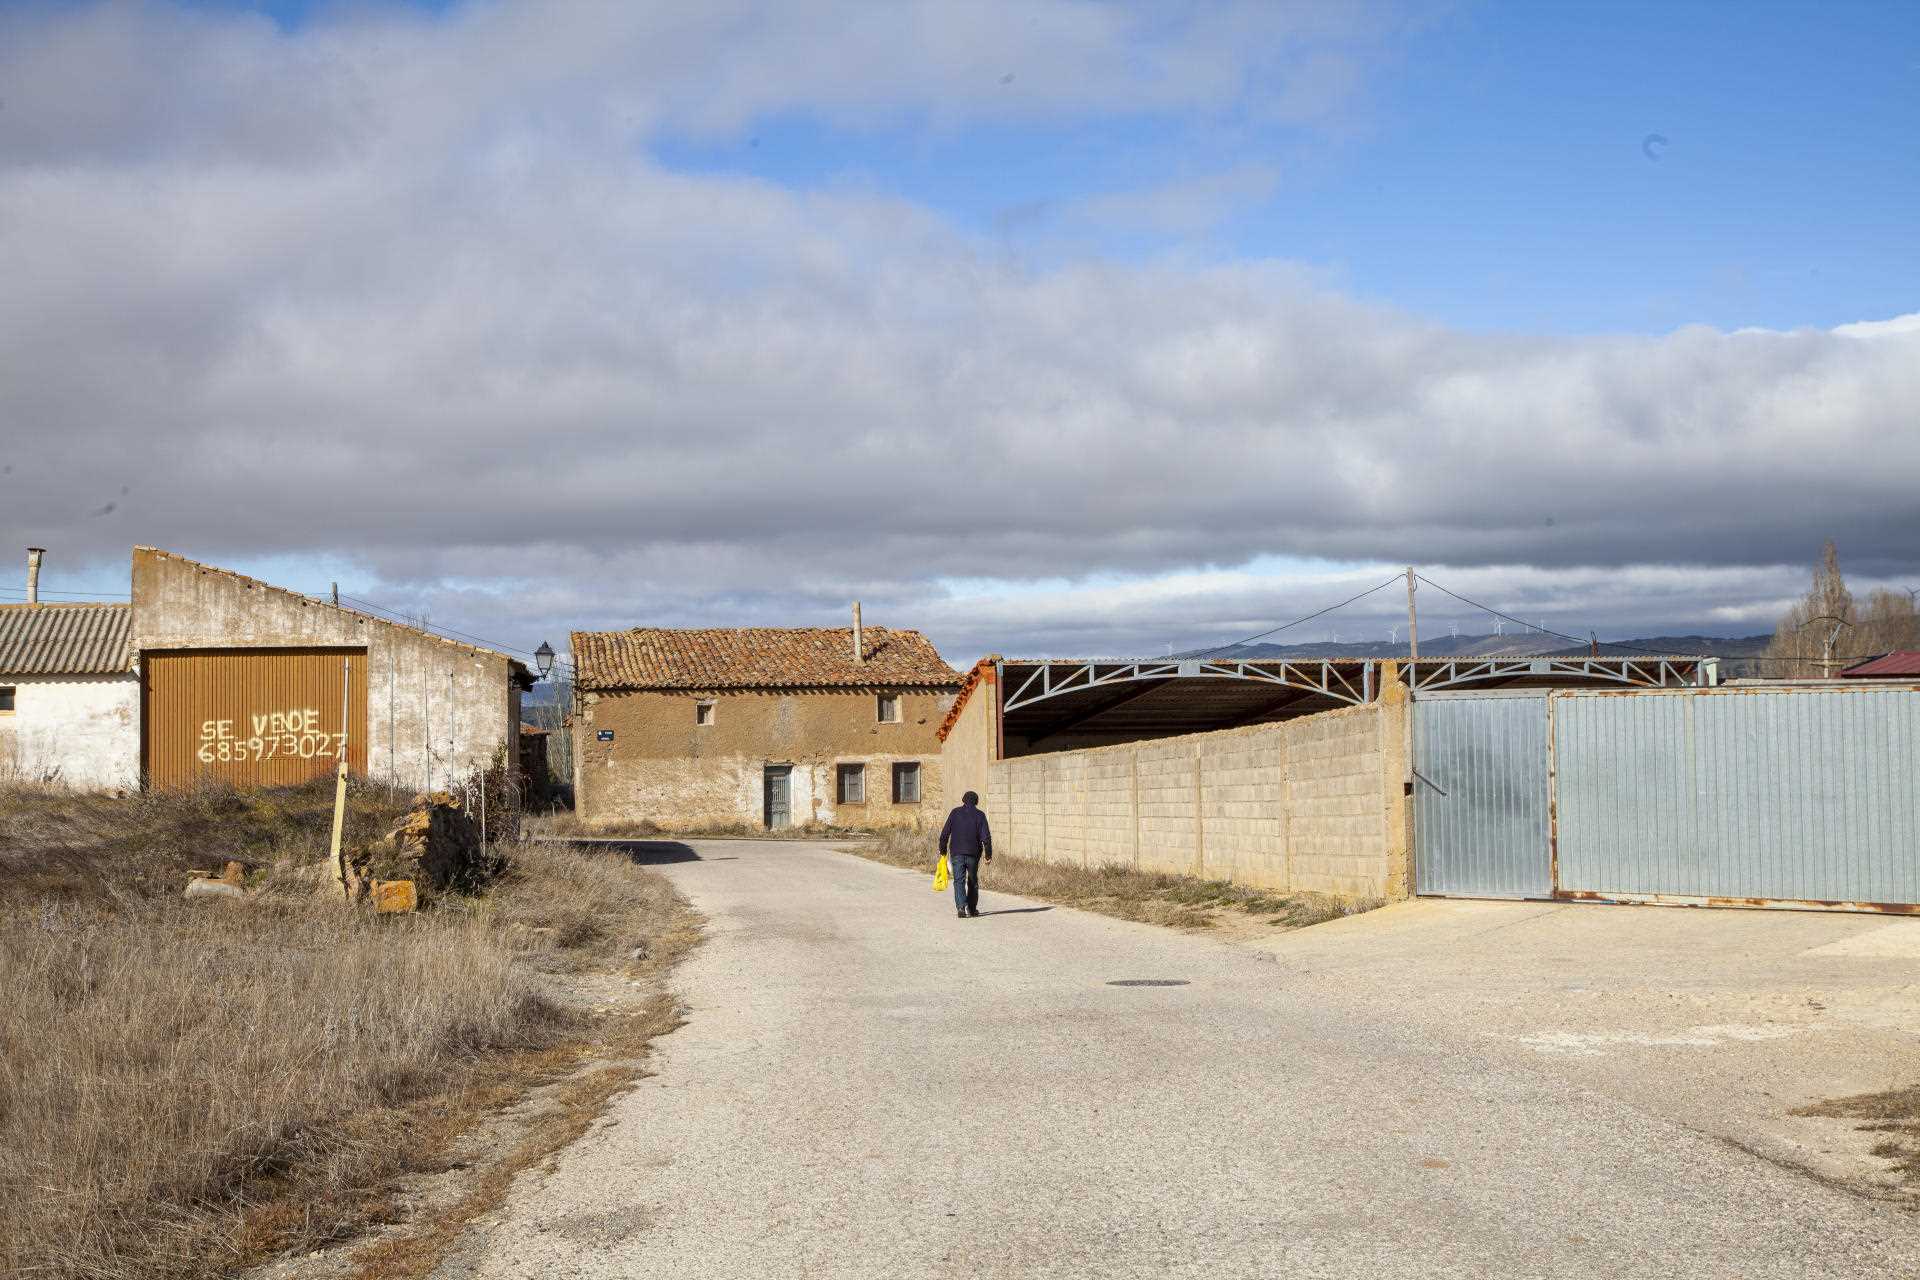 At the entrance to the village of Noviercas, in Spain, which has 160 inhabitants registered on the electoral lists, on February 5, 2022.